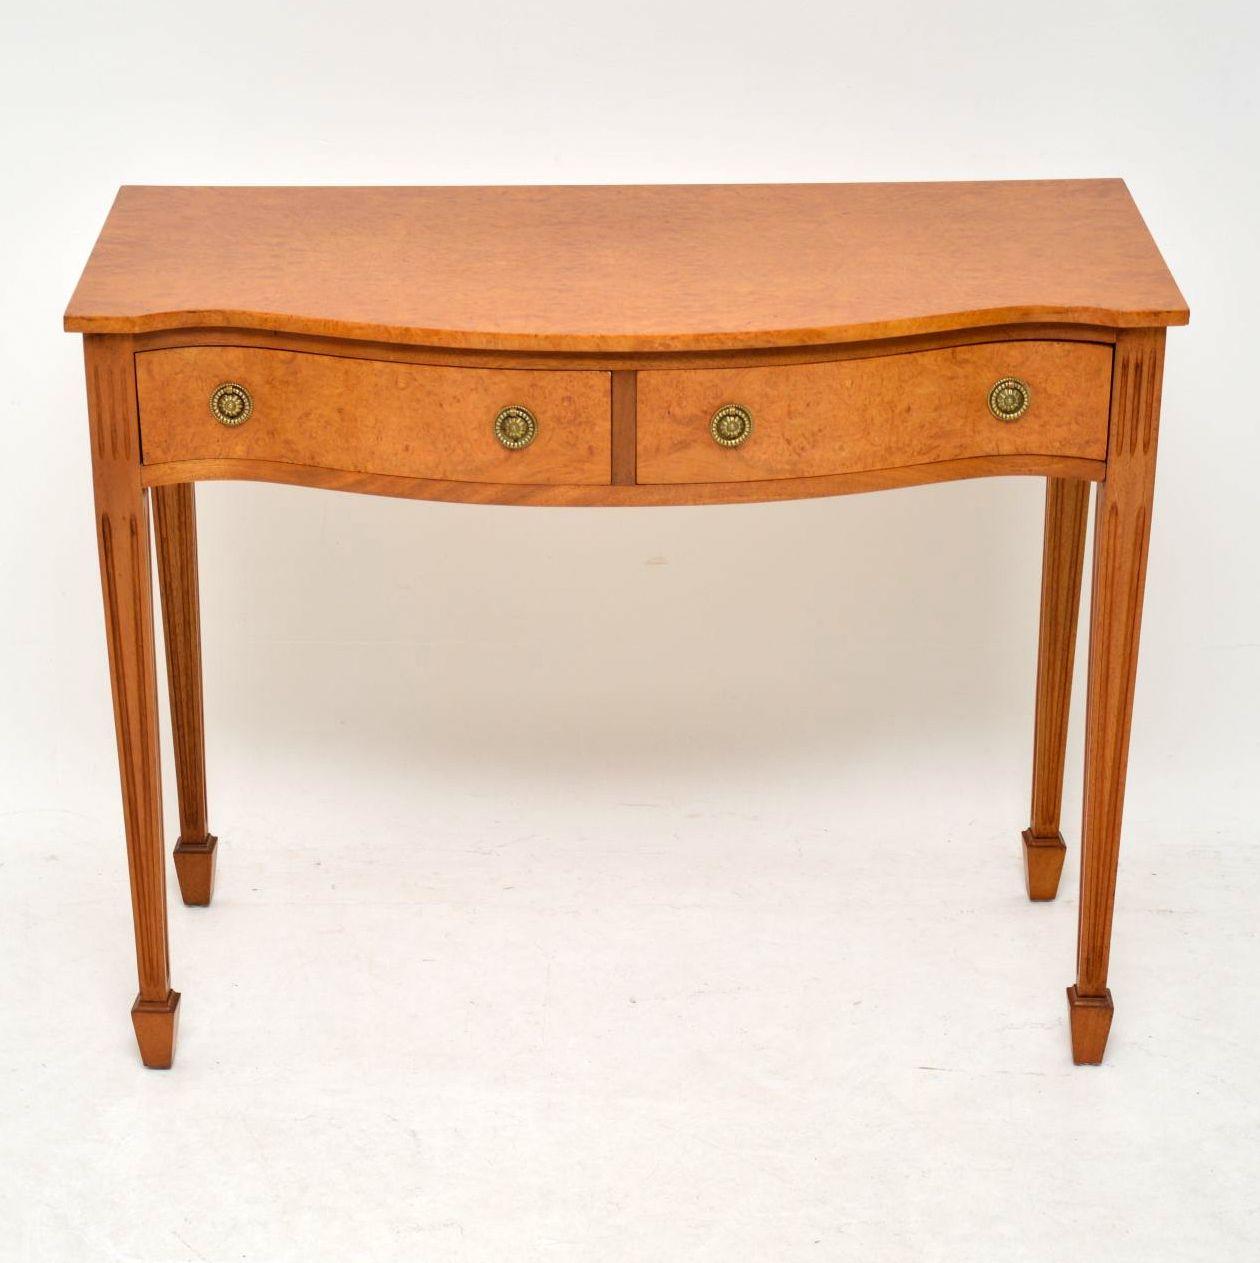 Antique burr maple side table or console in good condition, having just been French polished. It’s very rare to find this sort of table in this lighter wood and this one has a wonderful color. This table has a serpentine shaped front, two drawers